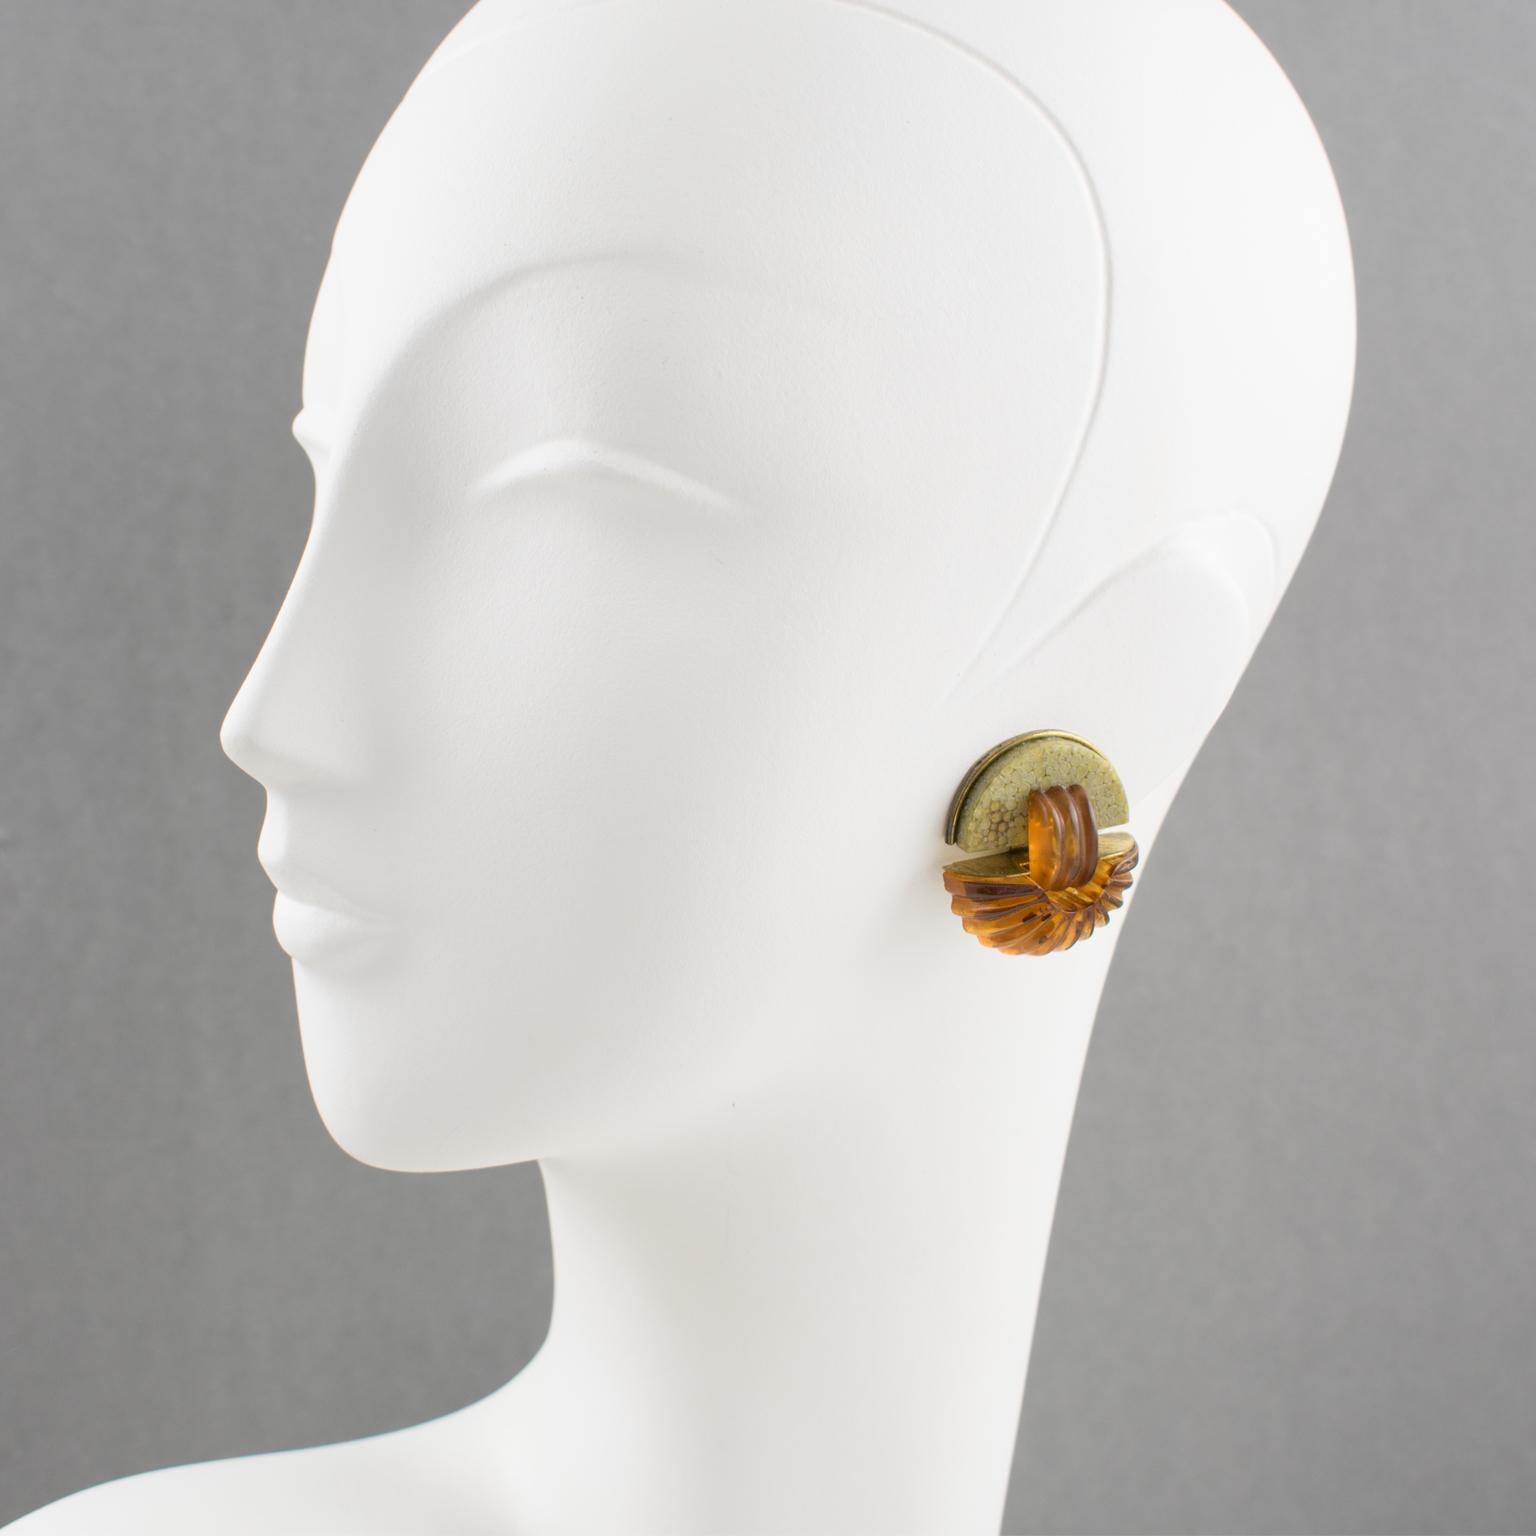 Elegant Fabrice Paris signed clip-on earrings. Featuring Art Deco revival inspired geometric design. Gilt brass framing topped with natural shagreen (stingray skin) and ornate with carved resin elements in translucent apple juice and amber color.